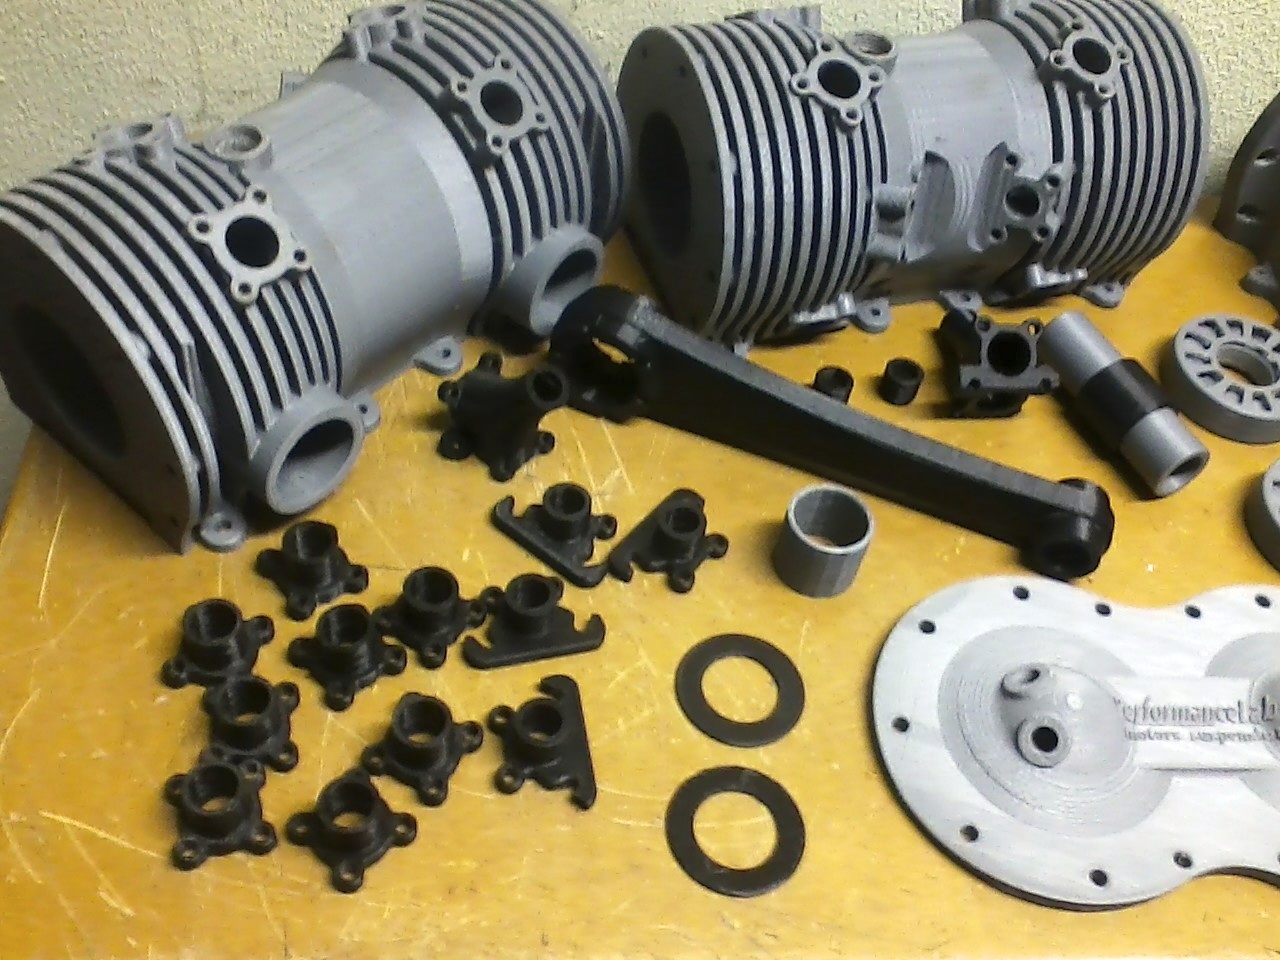 Simplify3D - 3D printed engine cylinder in pieces